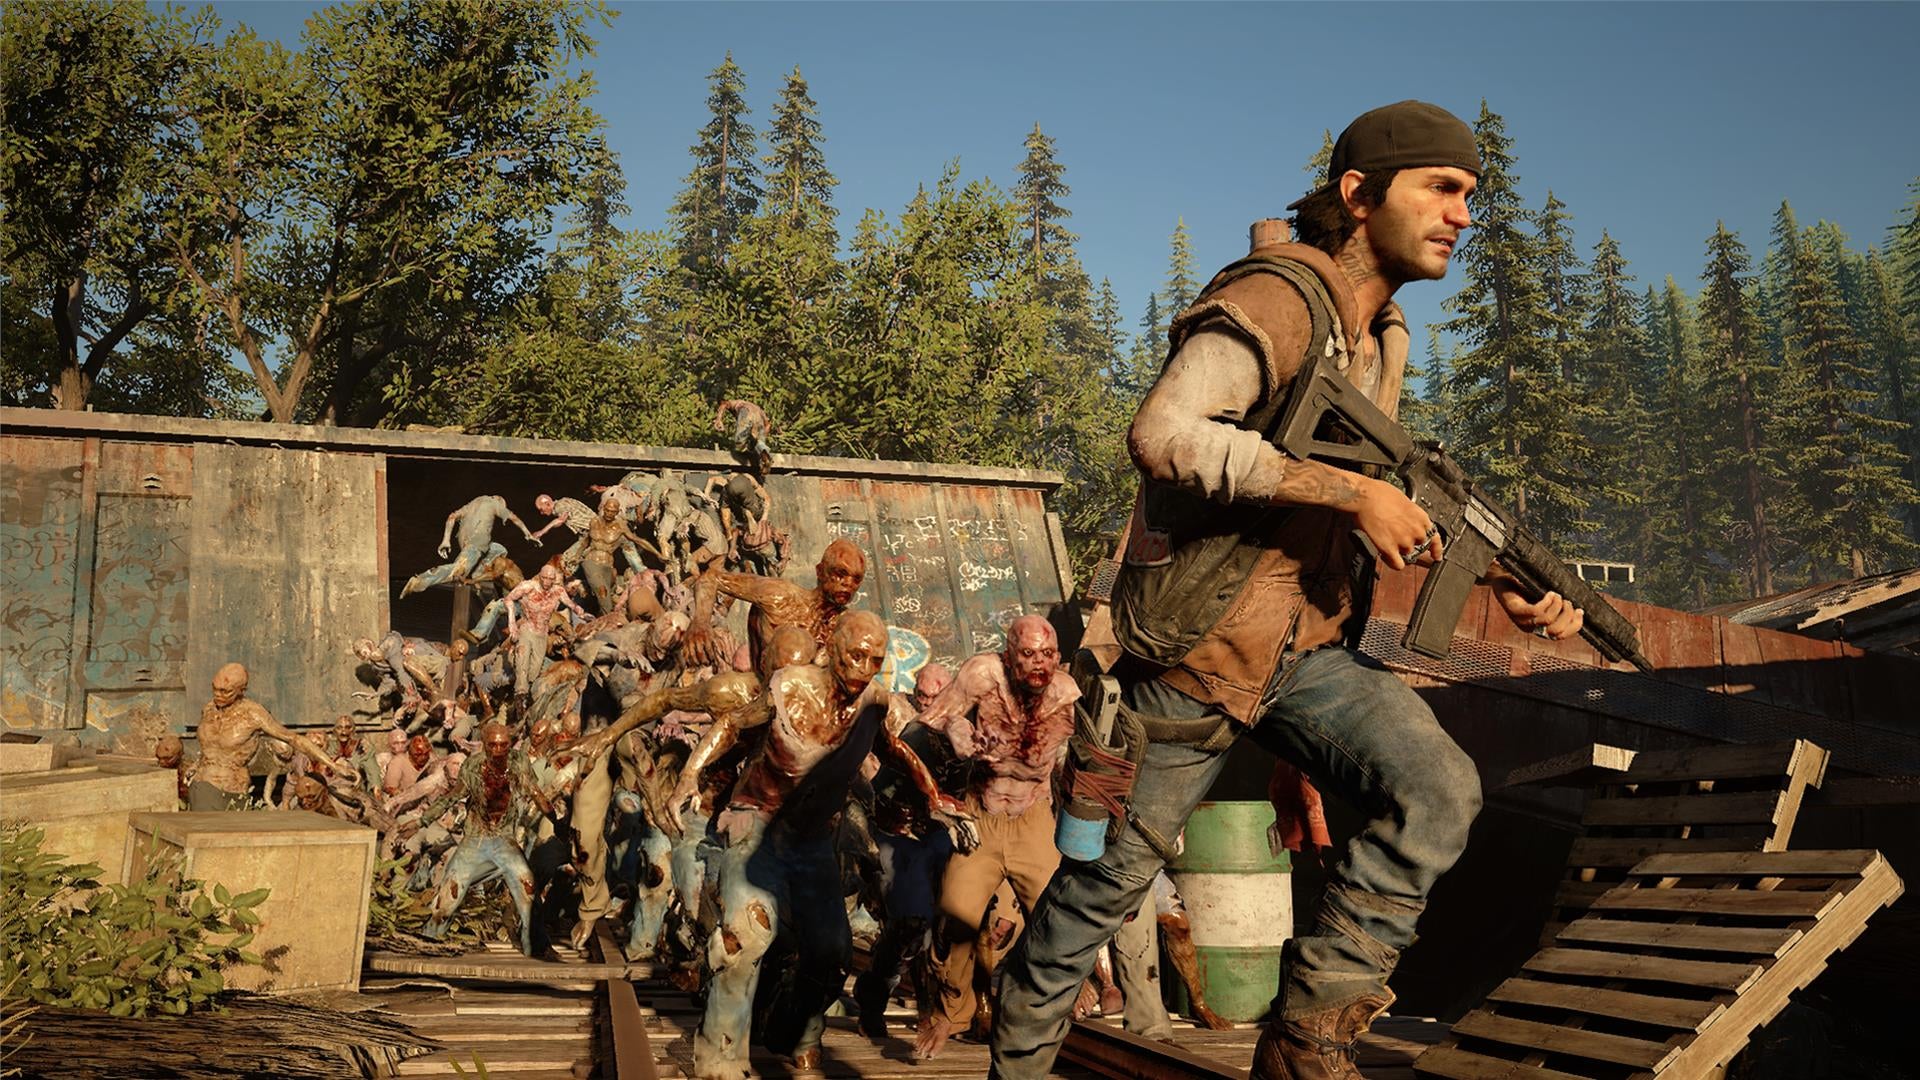 Image for Days Gone release date, story, PS4 Pro details, gameplay, bike customisation, and more